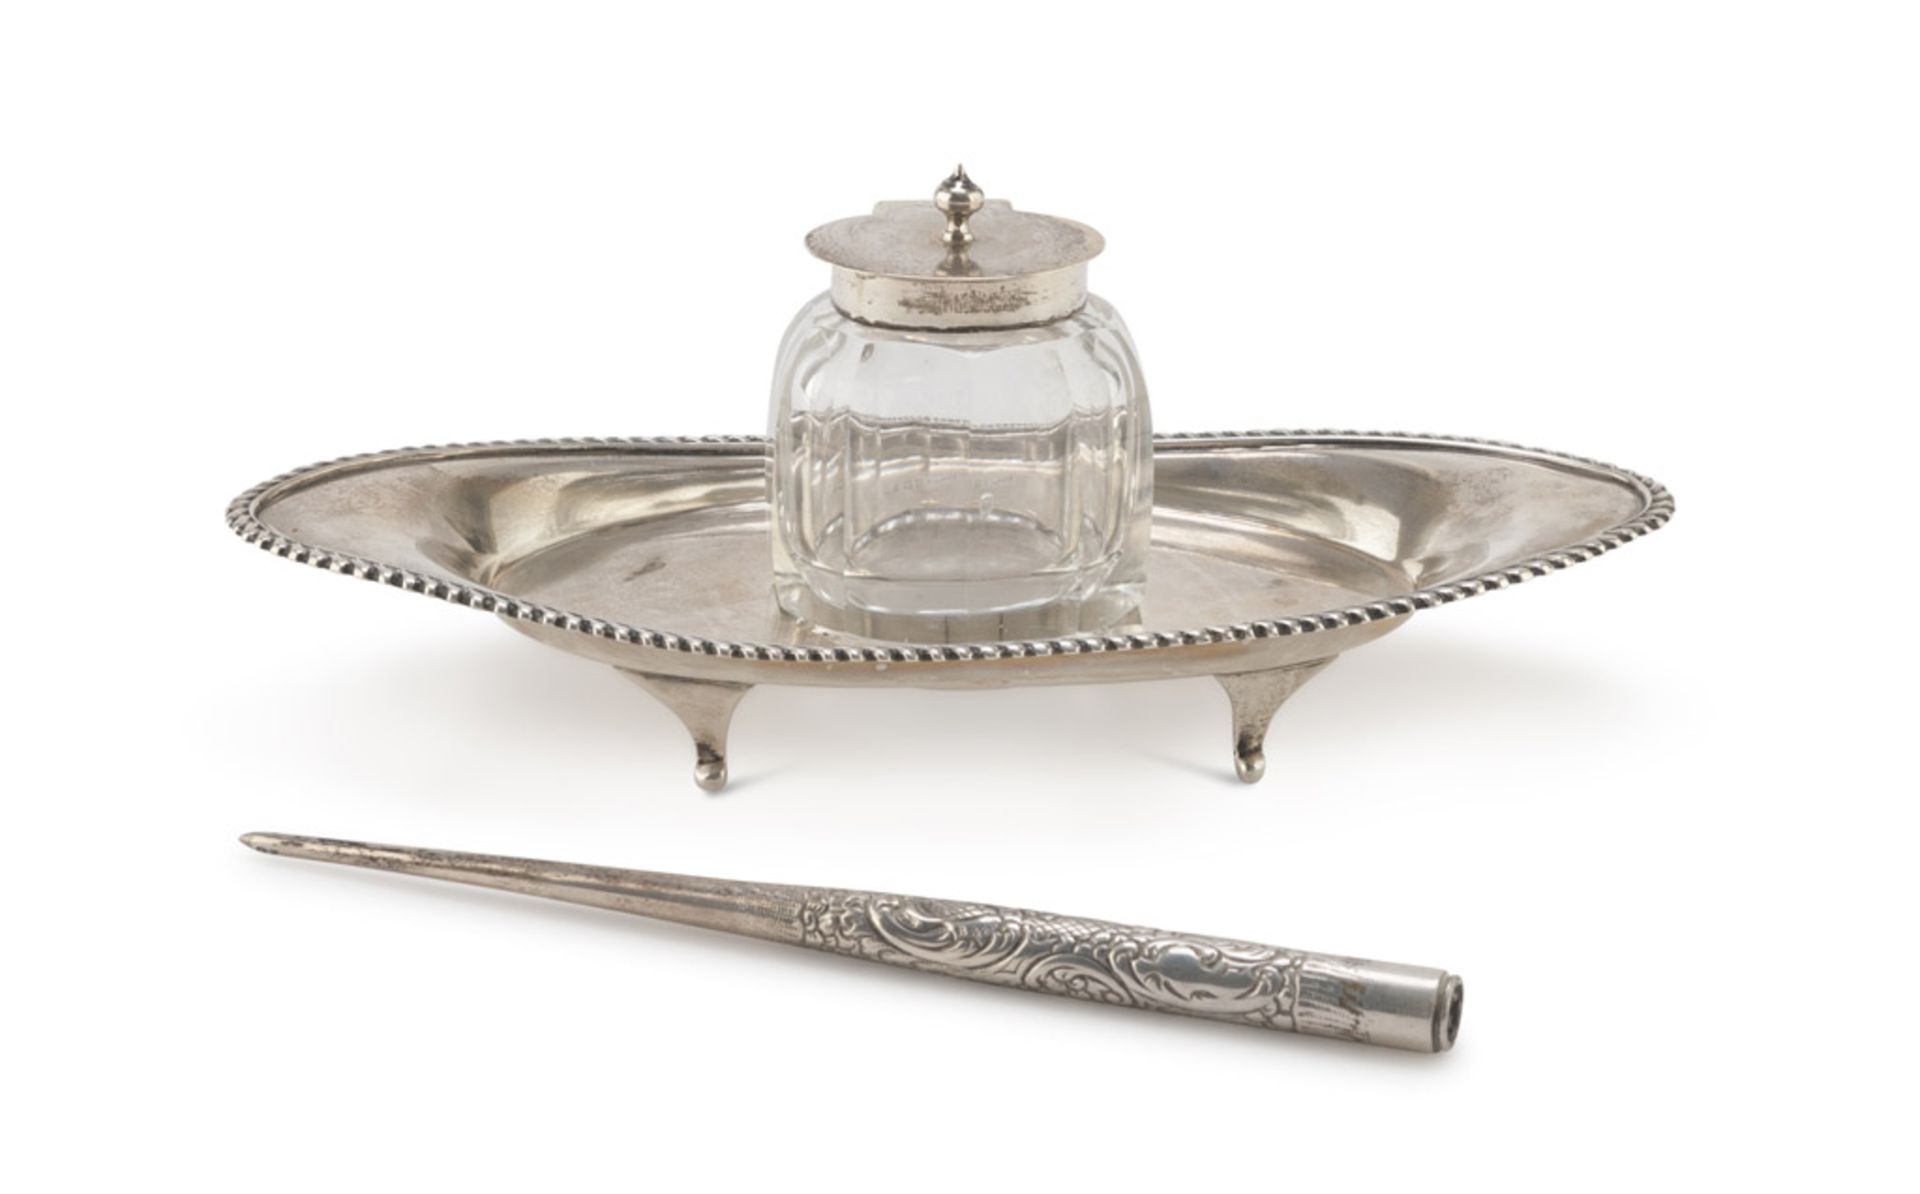 INKWELL IN SILVER, PUNCH BIRMINGHAM 1901 with small basin in cut glass and oval dish. Complete of